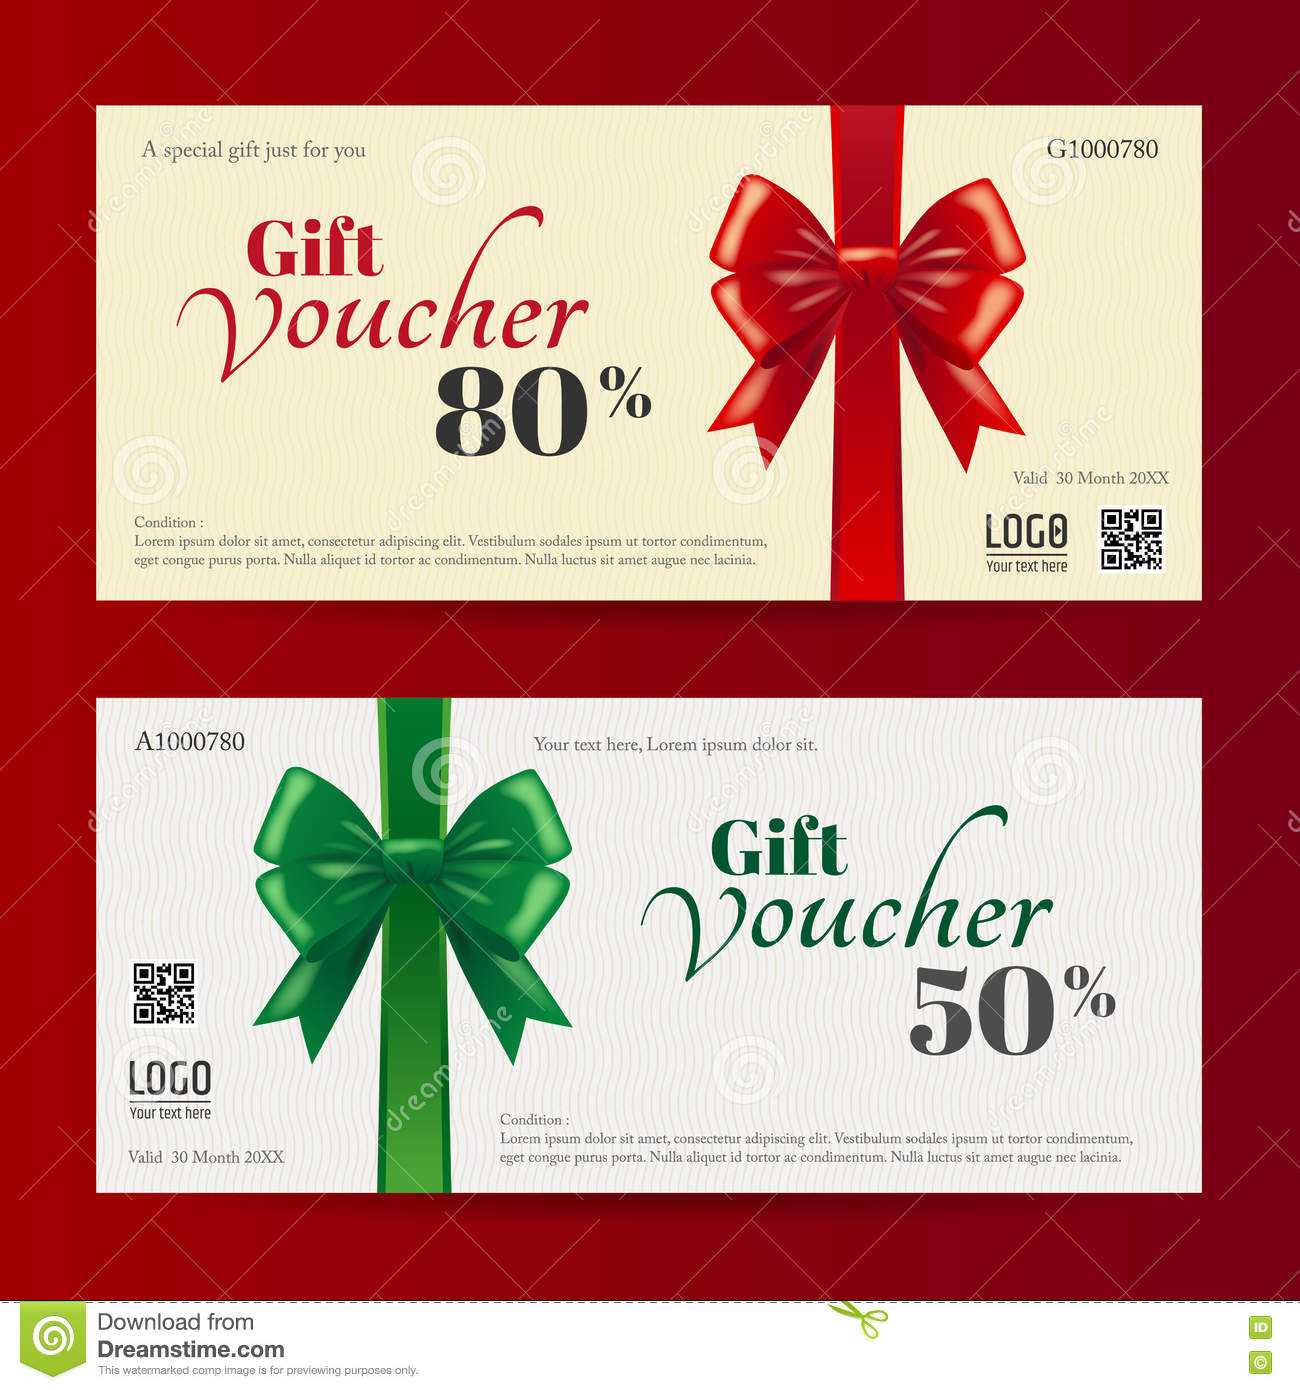 Elegant Christmas Gift Card Or Gift Voucher Template Stock Pertaining To Free Christmas Gift Certificate Templates